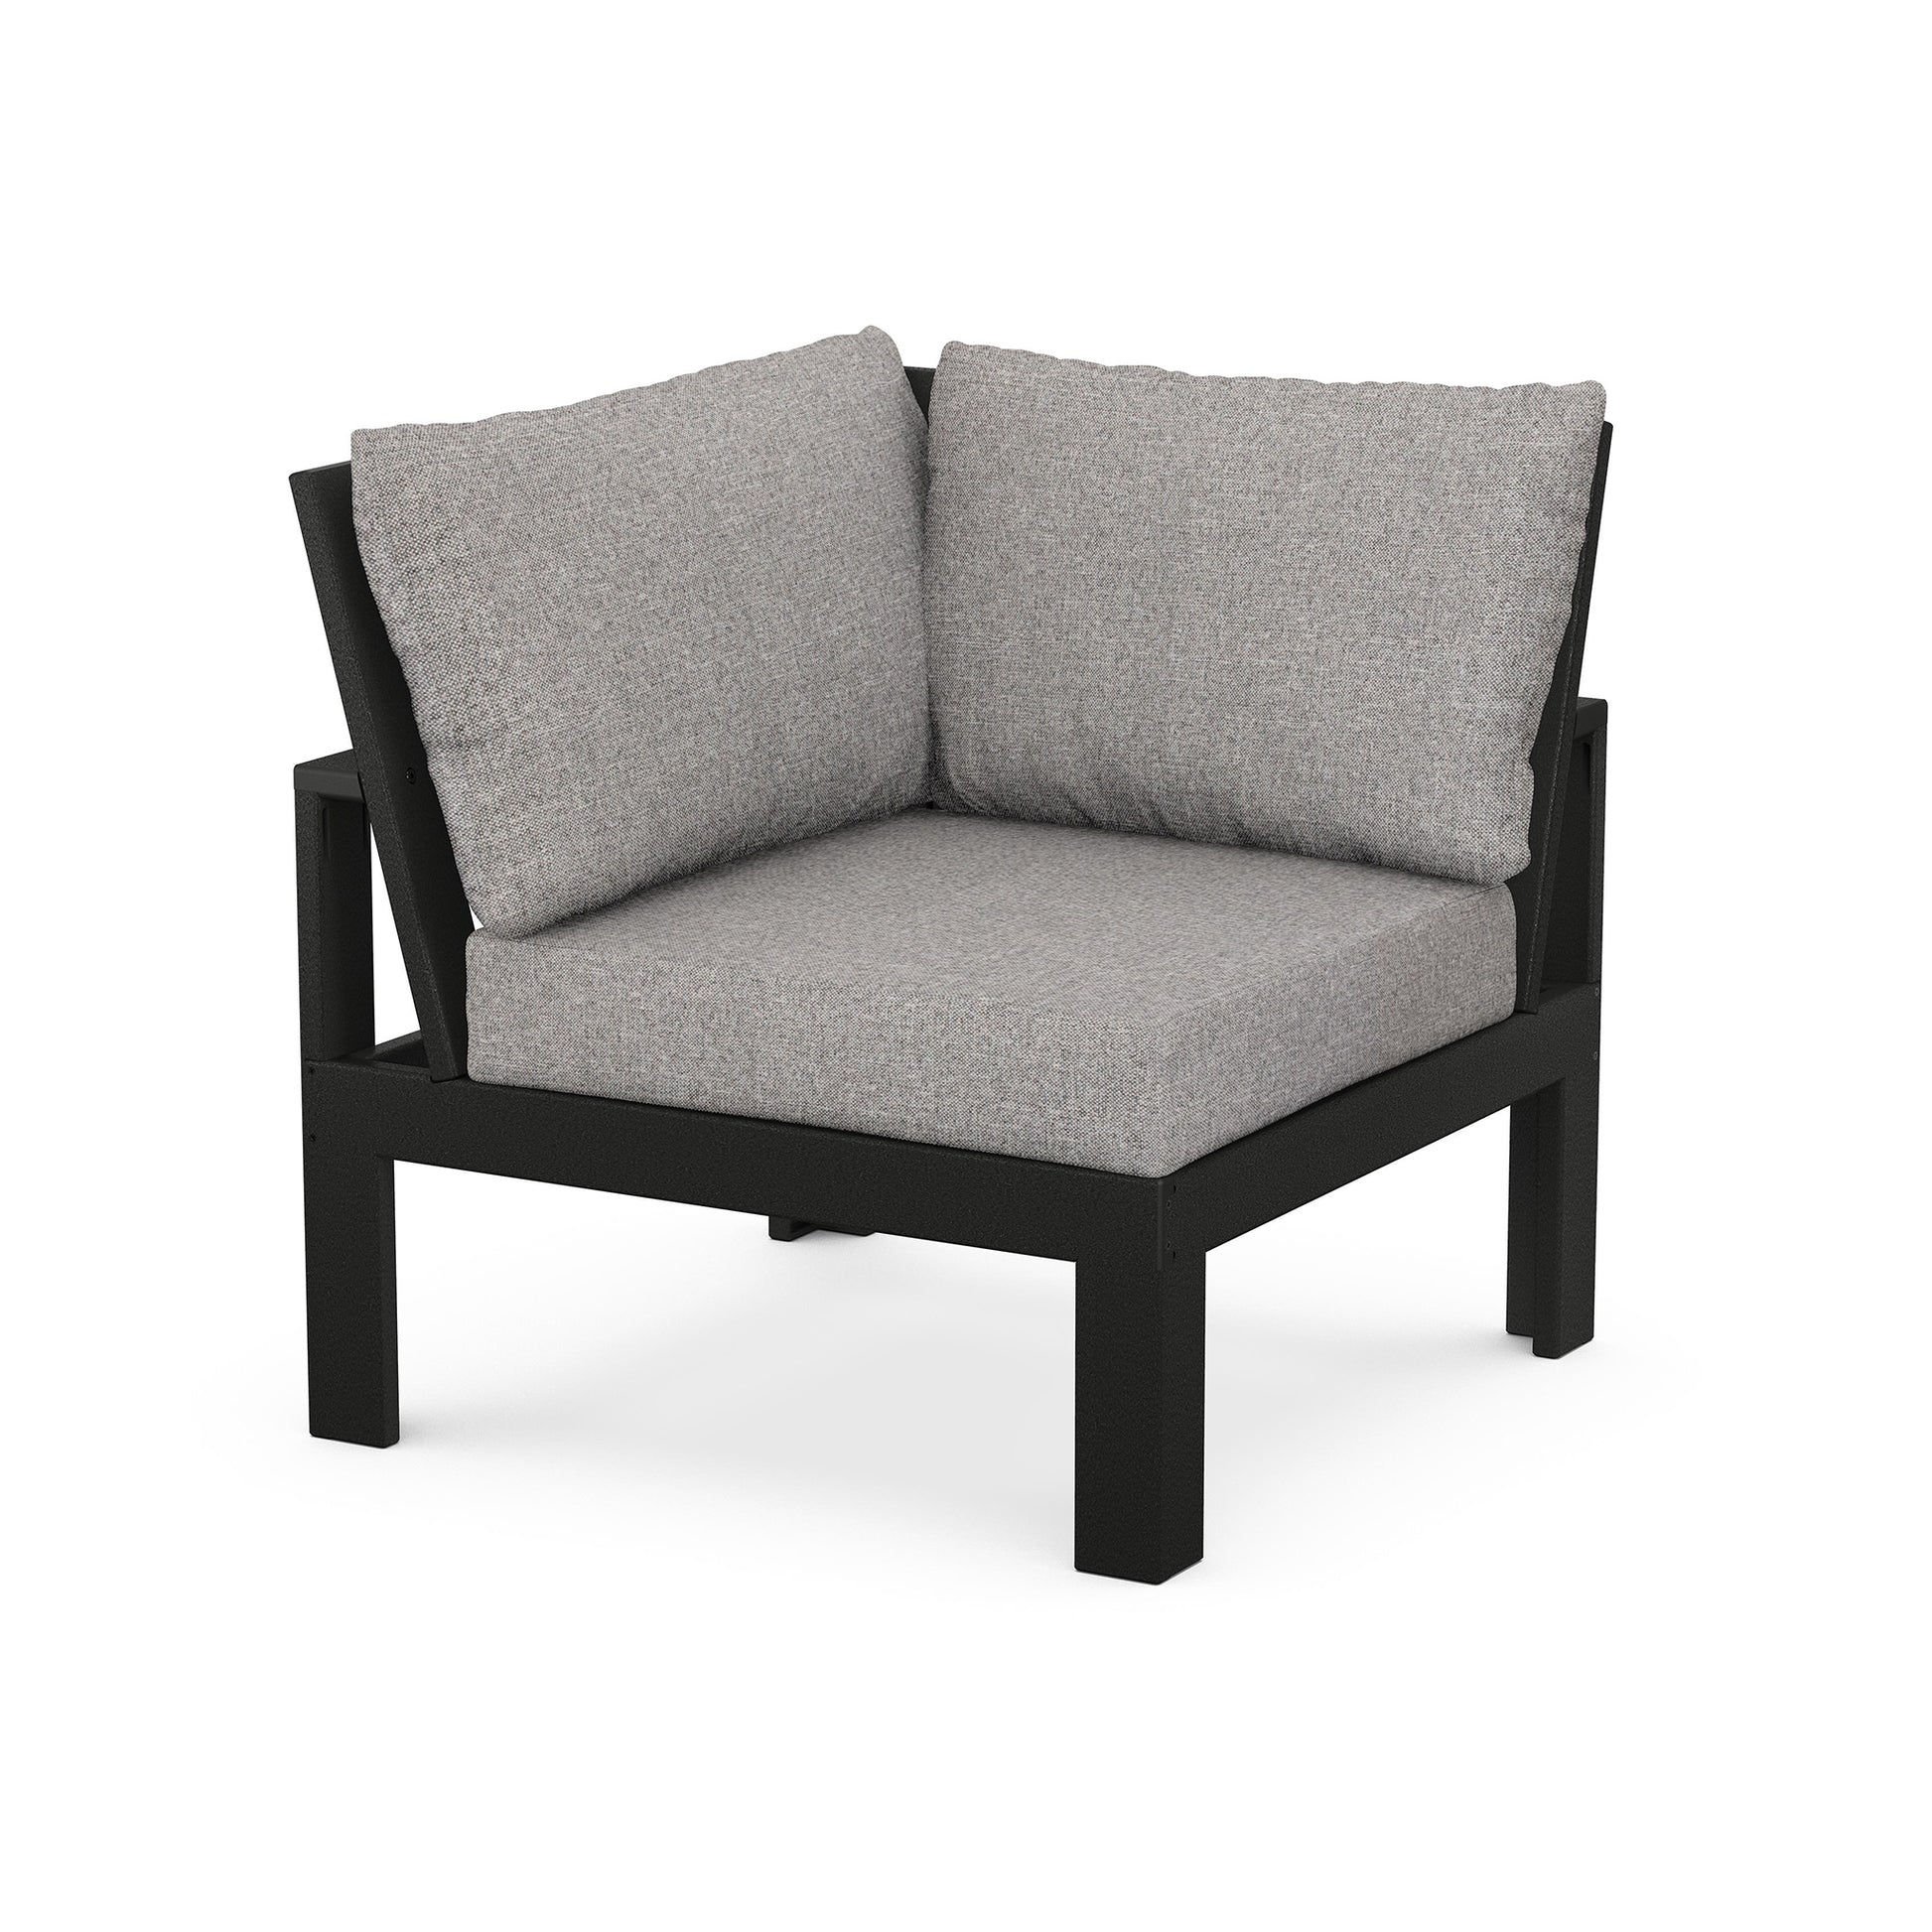 A modern POLYWOOD Modular Corner Chair with a black metal frame and light gray cushions, viewed against a white background.